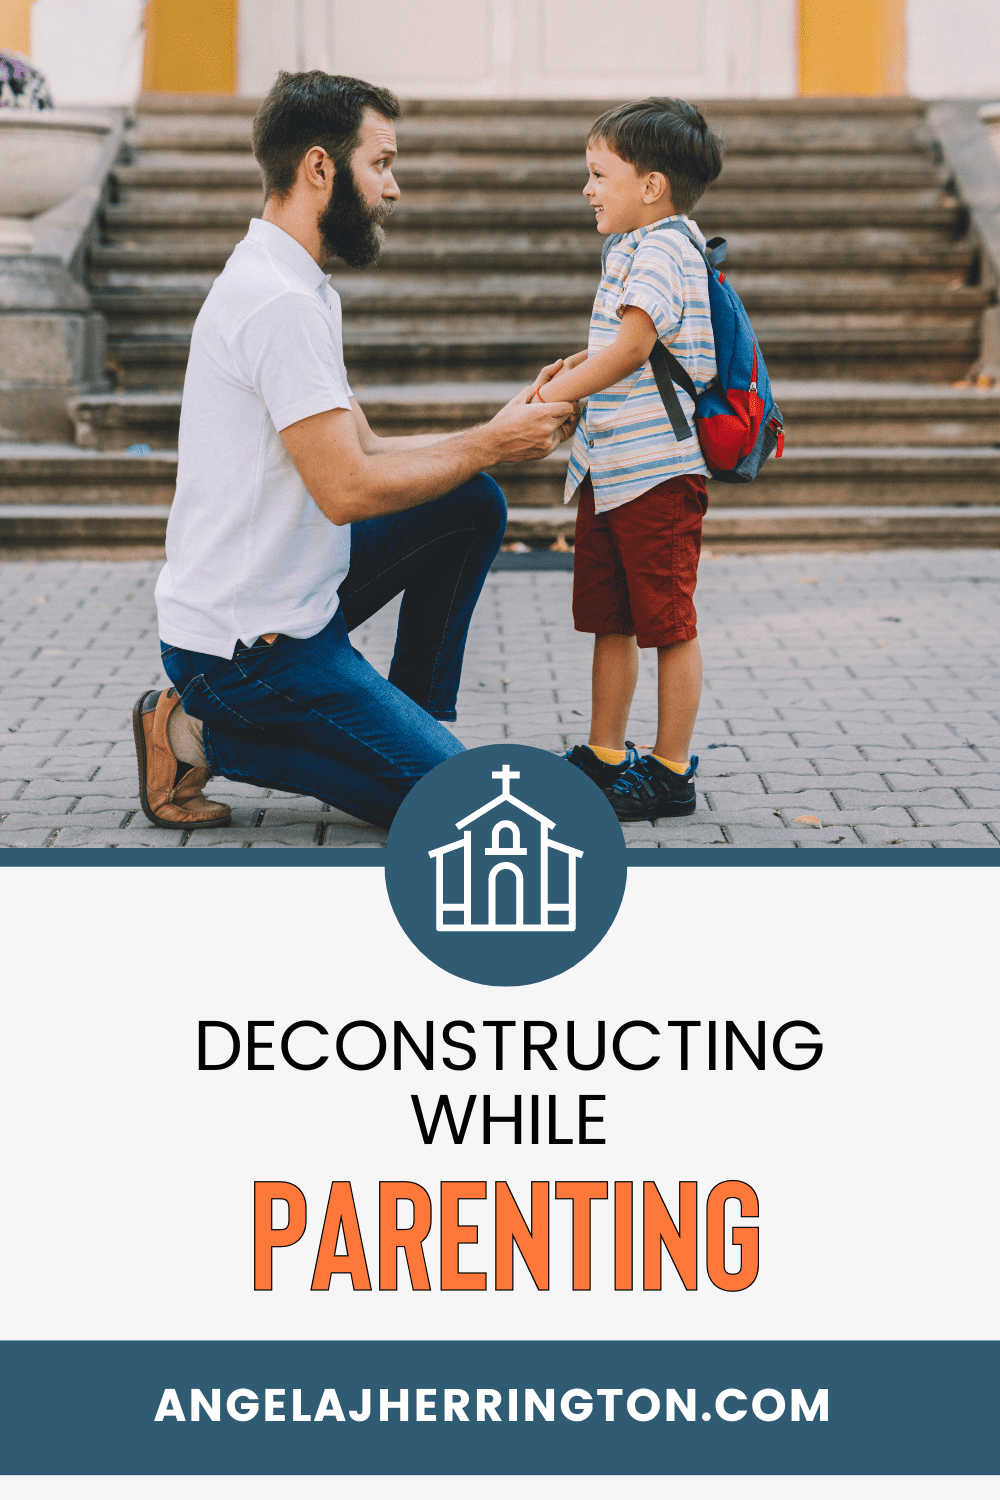 deconstructing while parenting written in black and orange on a graphic of a dad kneeling in front of a daughter